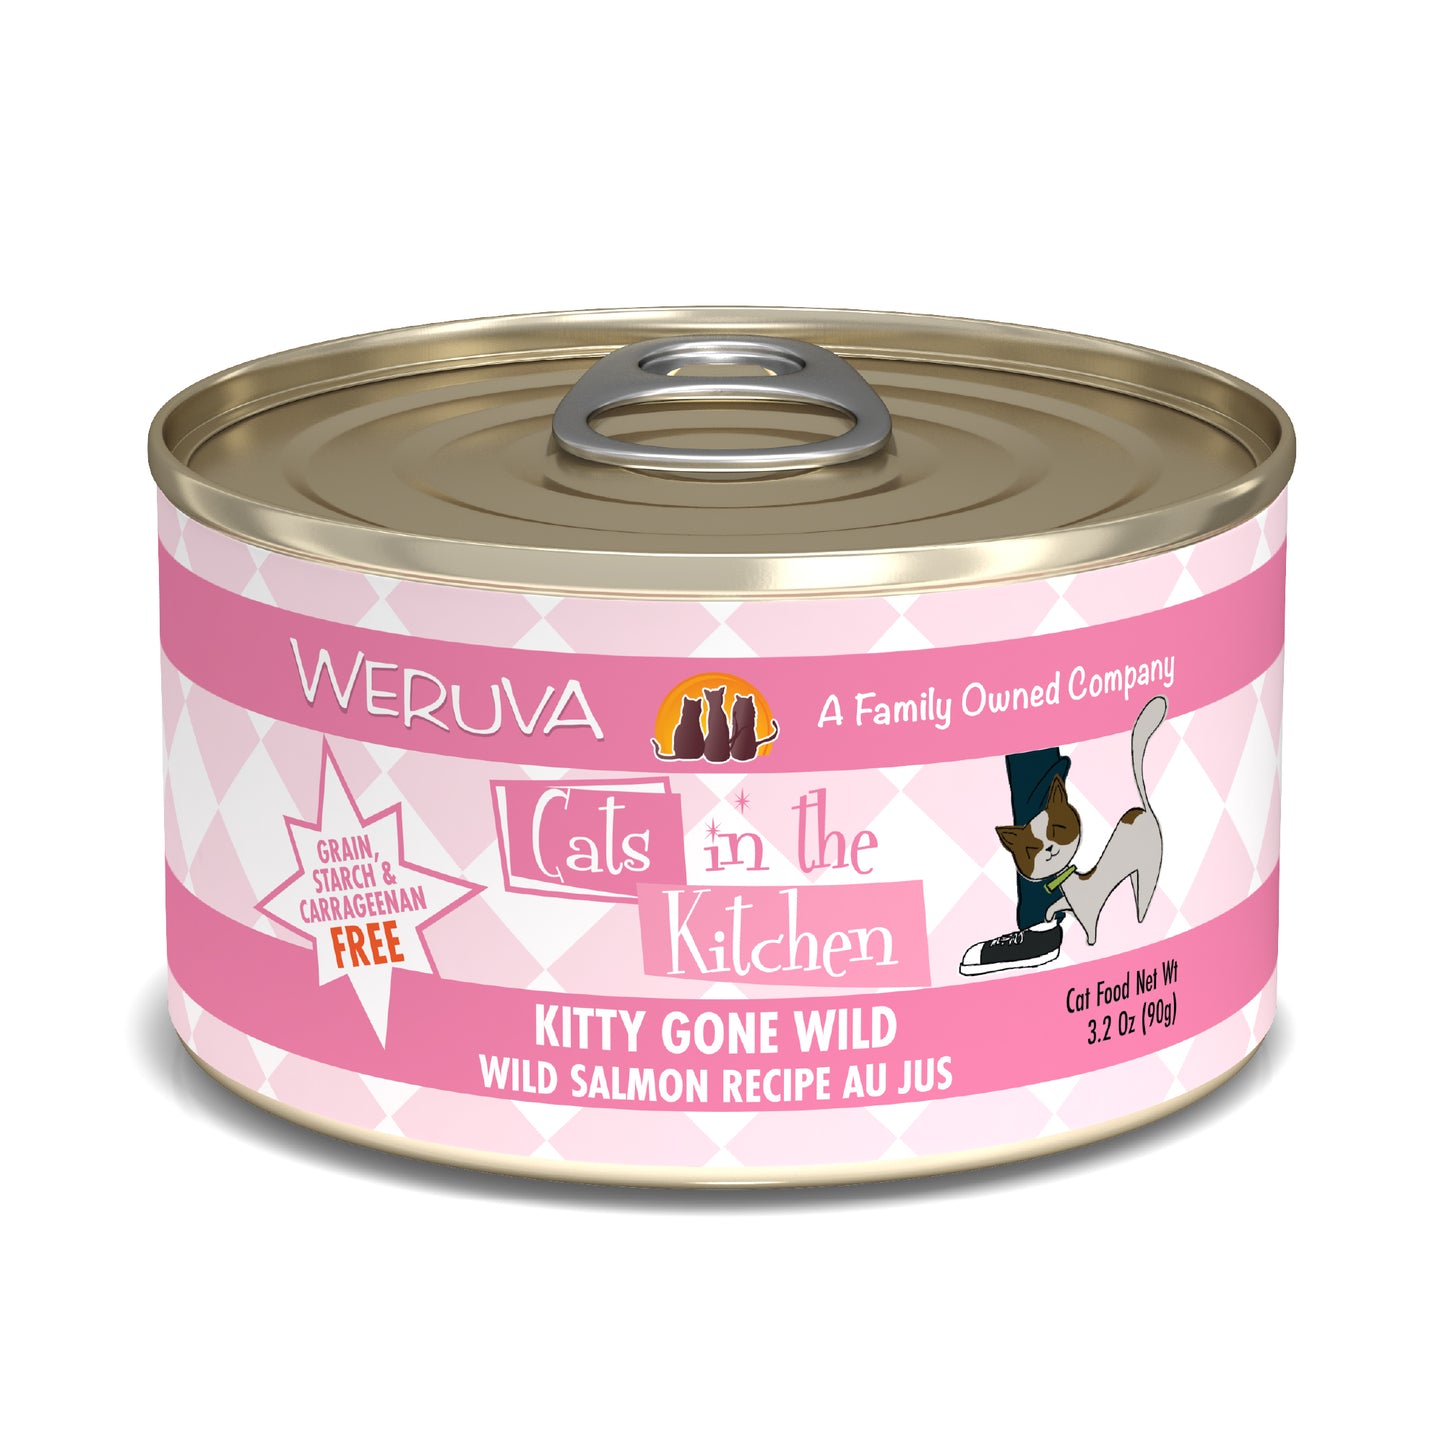 Weruva Cats in the Kitchen 3.2oz Canned Cat Food Kitty Gone Wild